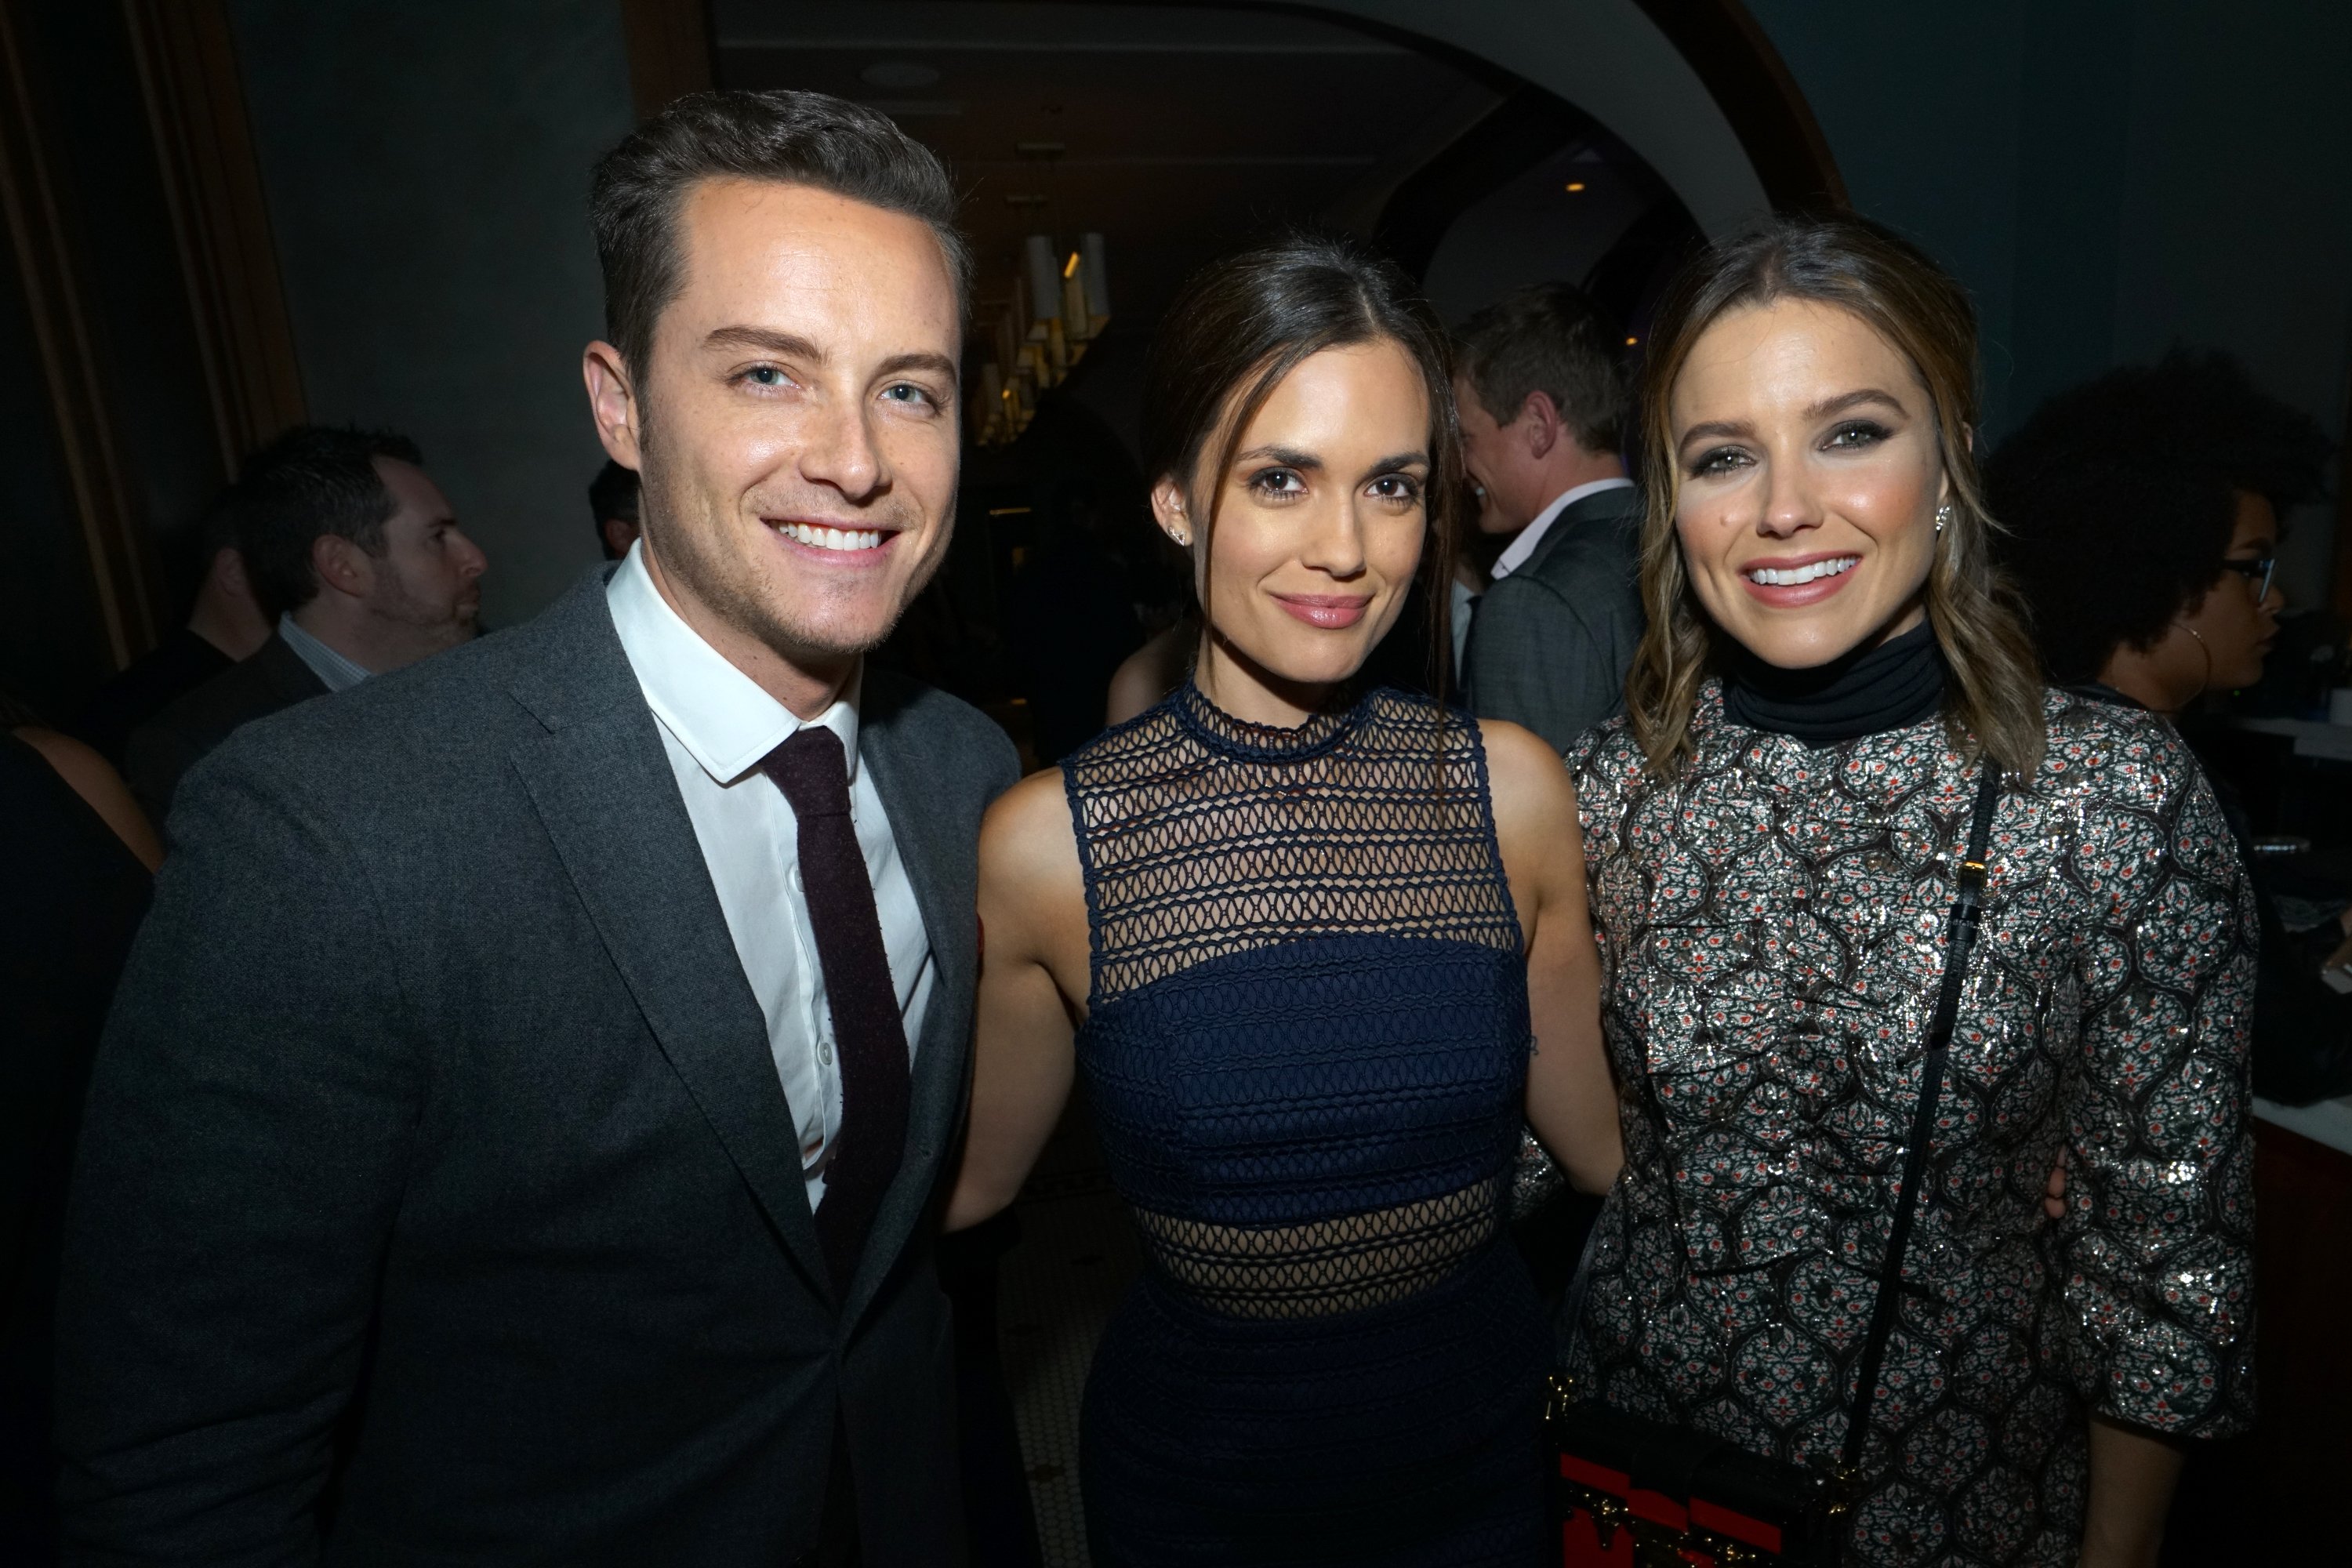 Jesse Lee Soffer, Torrey DeVito, and Sophia Bush attend the "One Chicago Day" party in Chicago, Illinois on October 24, 2016. | Source: Getty Images 